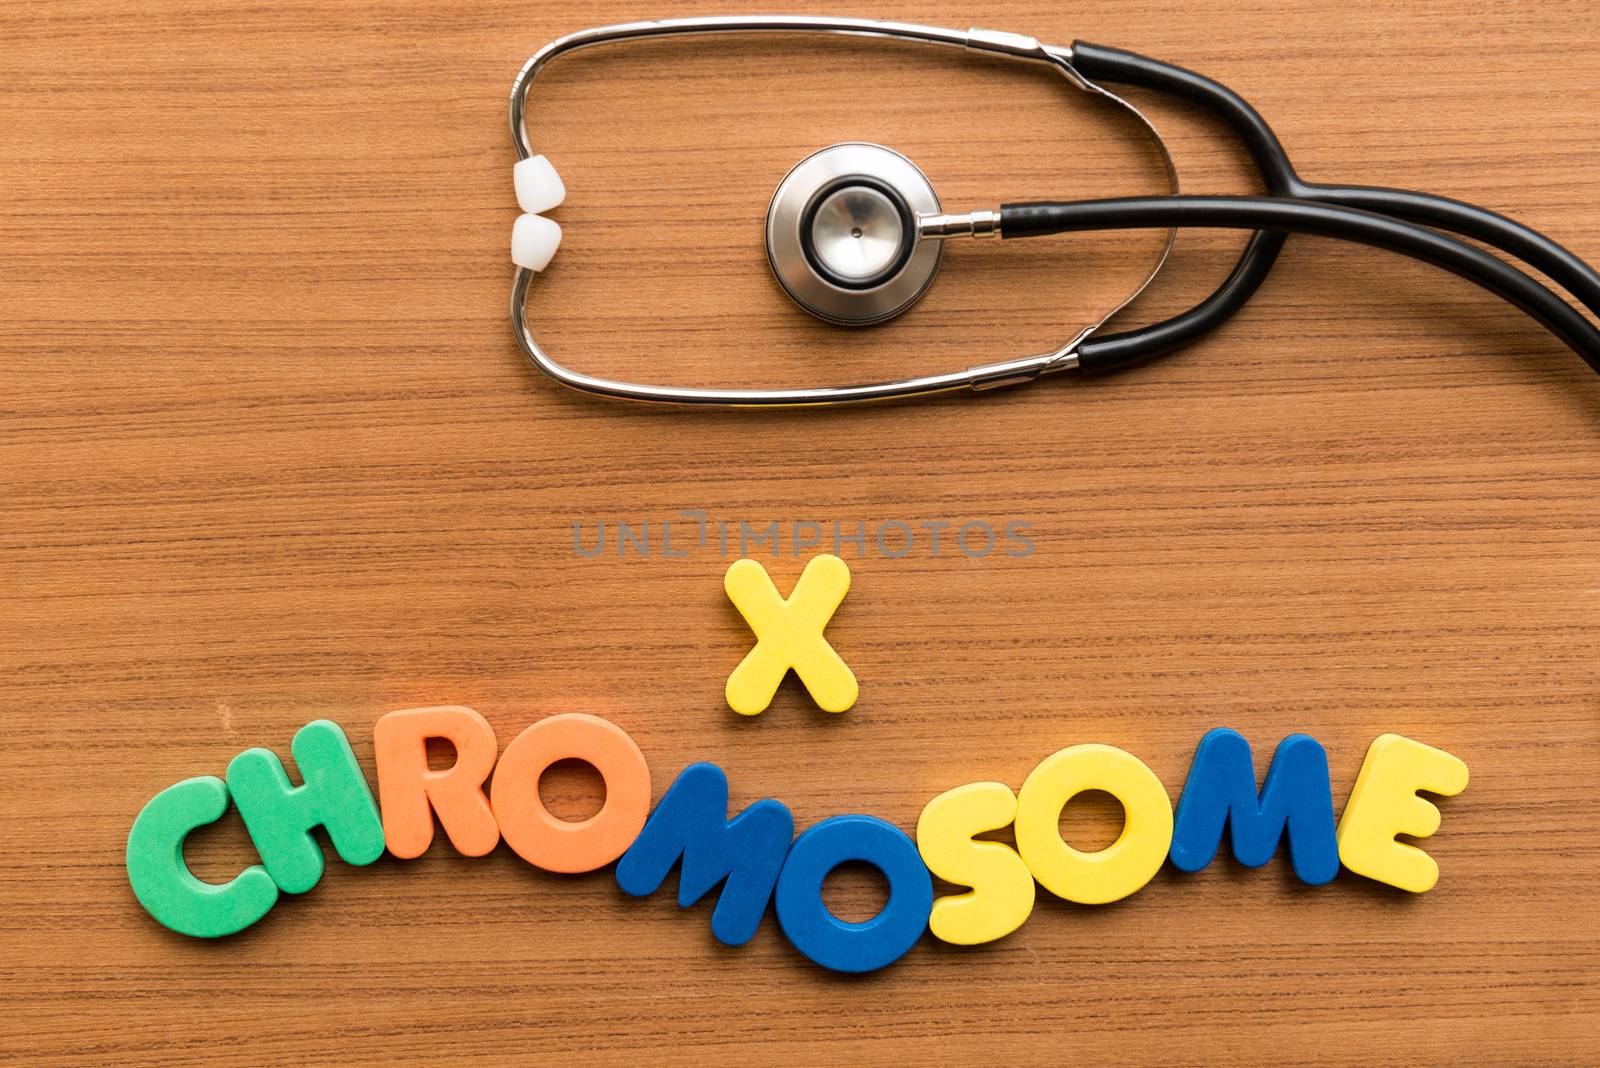 X chromosome colorful word with stethoscope on wooden background